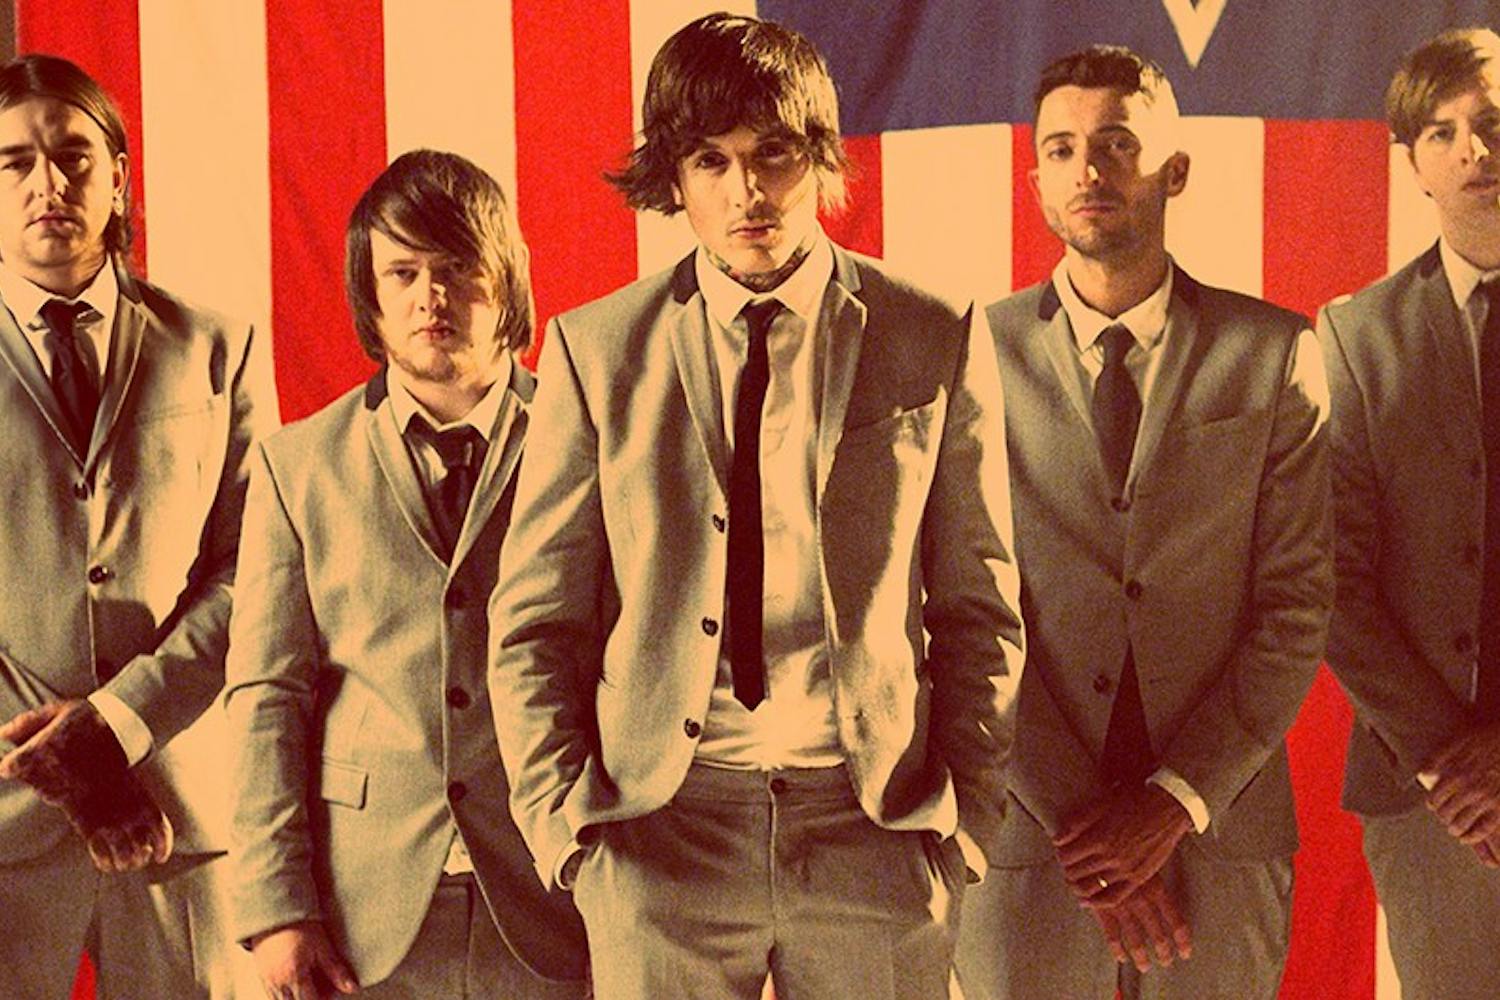 Bring Me The Horizon poses for a photo.